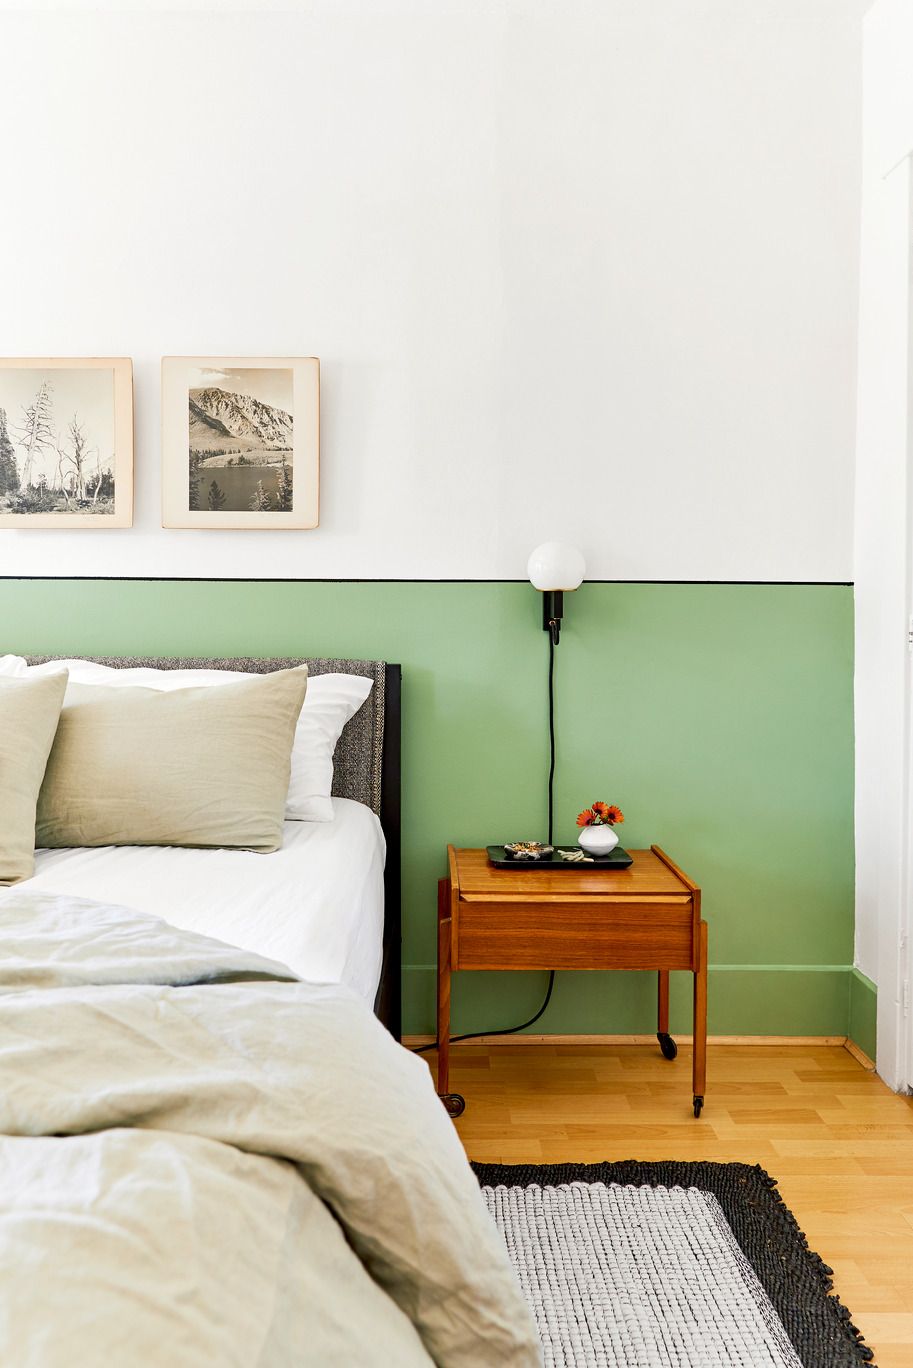 Bedroom with a headboard painted green all along the wall